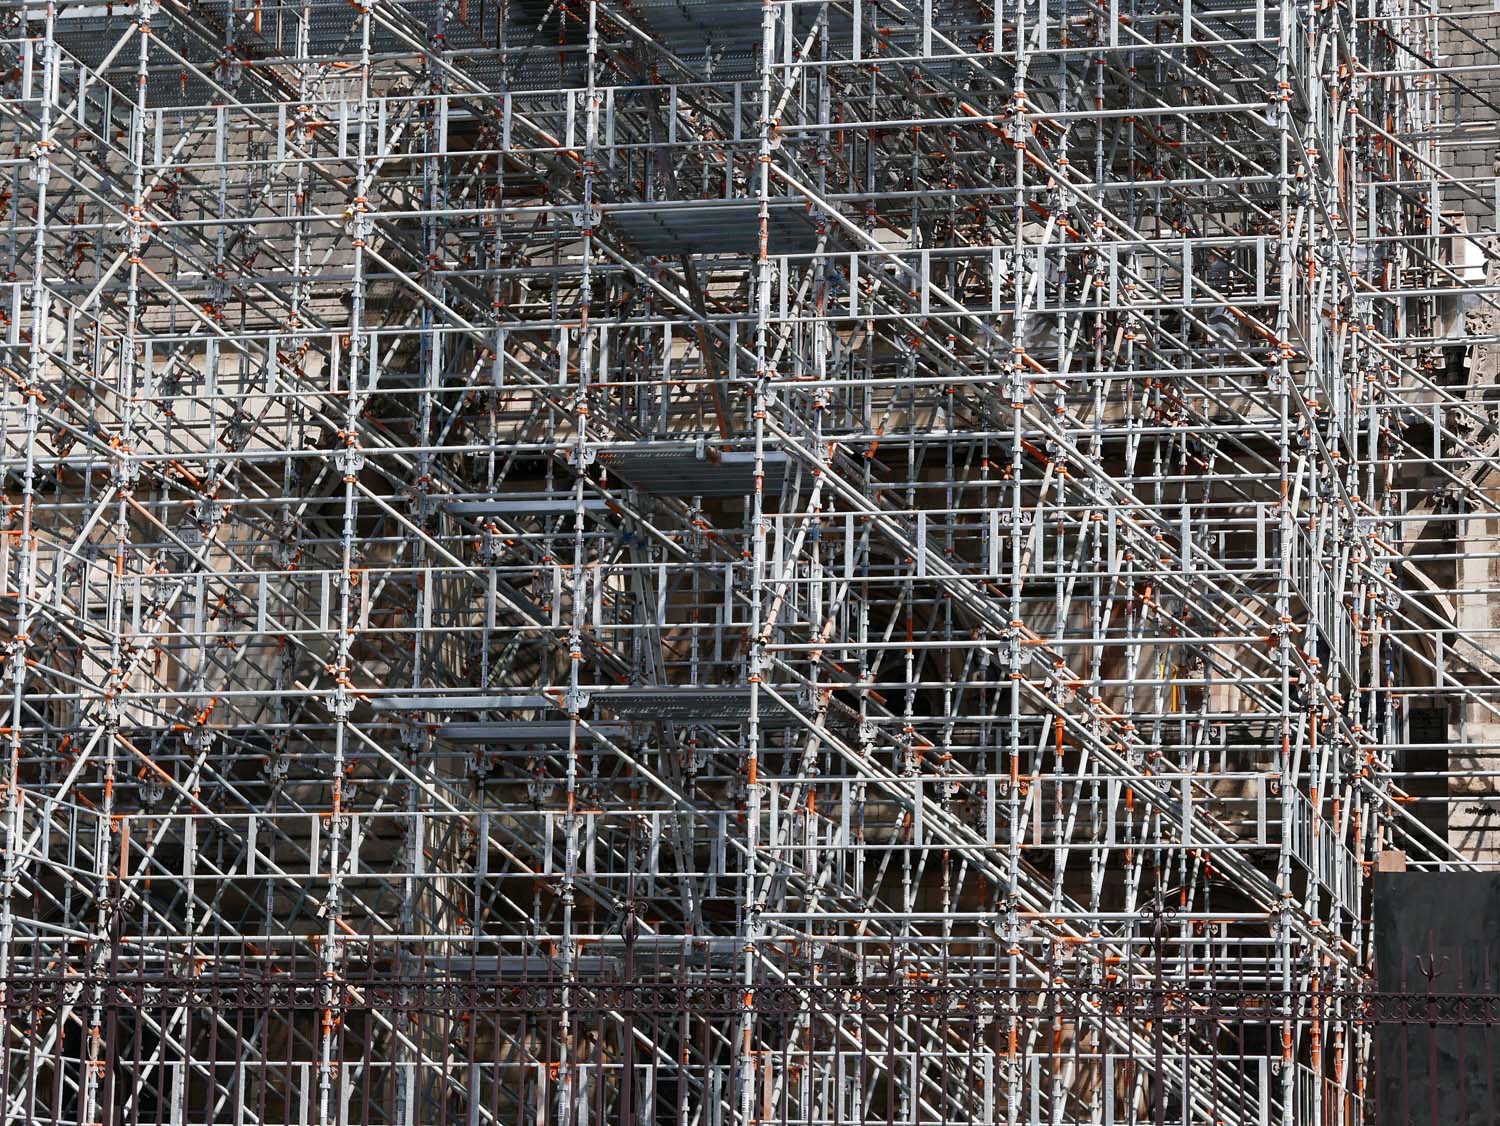 Scaffolding on the Parliament building